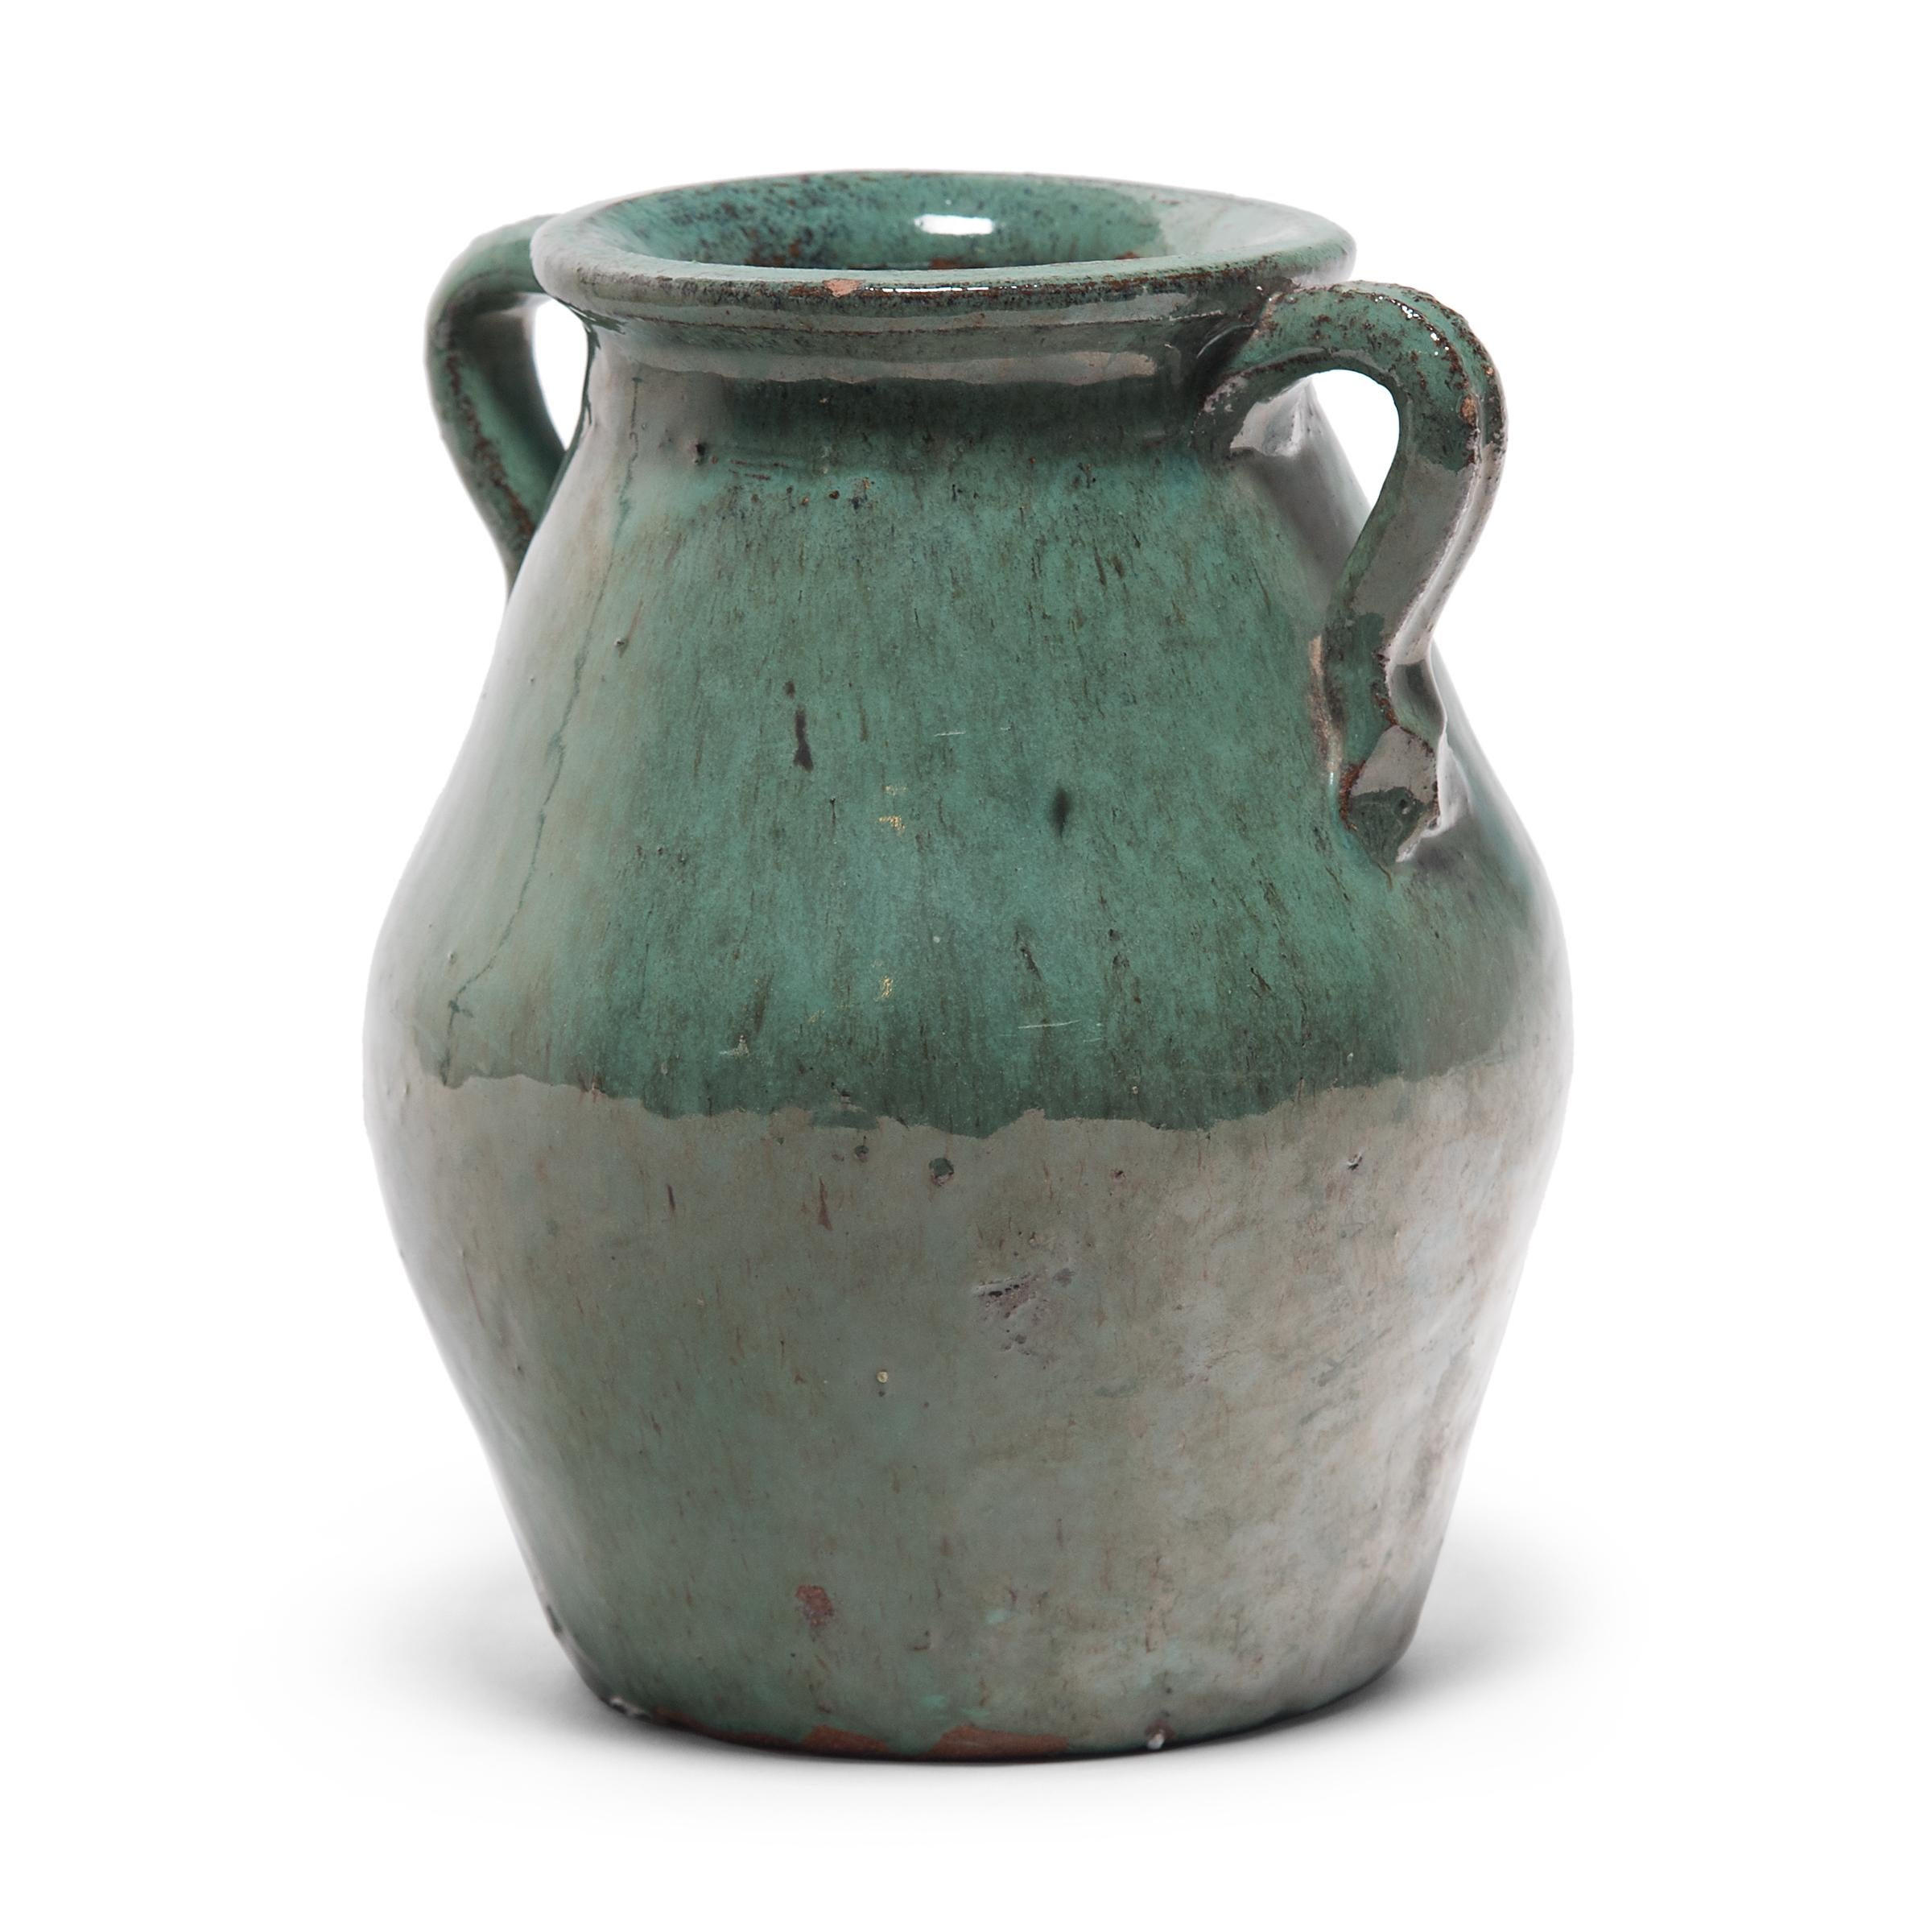 A luminous blue-green glaze sheets, pools and drips down the surface of this early 20th century kitchen jar. The pear-shaped jar has a tapered body and a wide flared mouth framed by simple strap handles. The monochrome jade green glaze exhibits a